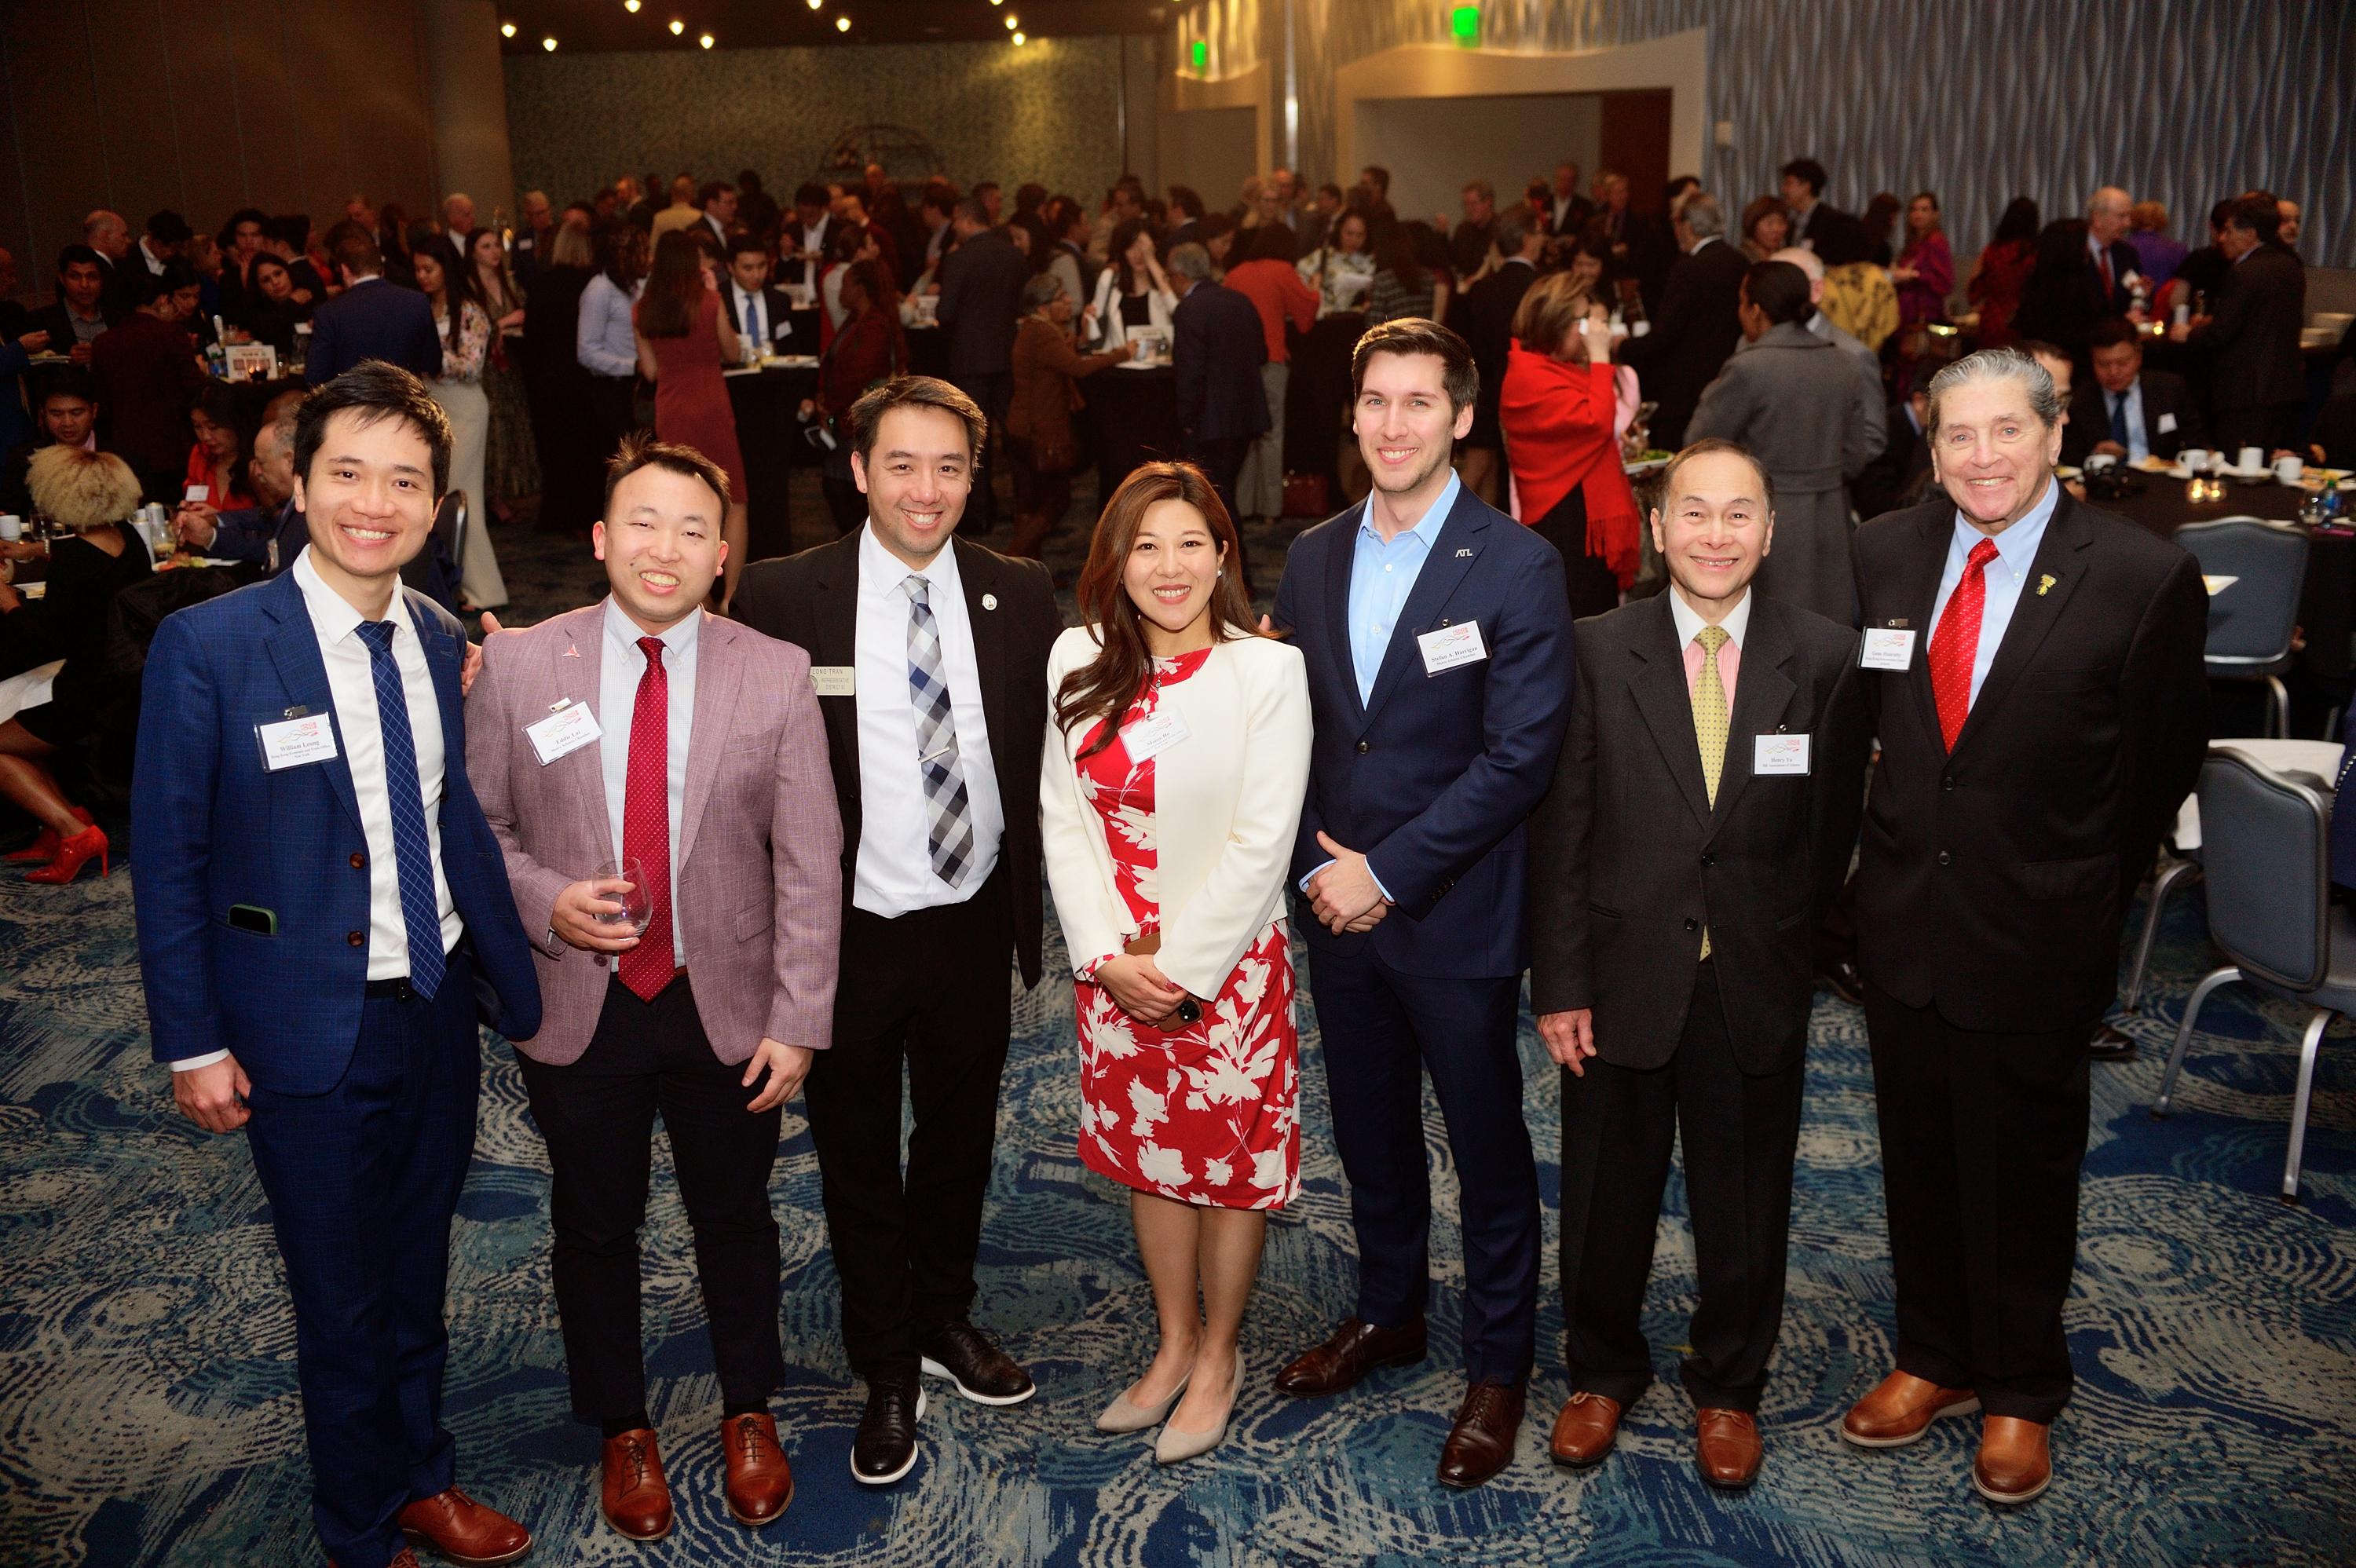 The Director of the Hong Kong Economic and Trade Office, New York, Ms Maisie Ho, promoted Hong Kong's fintech and innovation and technology during her three-day duty visit in Atlanta, Georgia from February 21 to 23 (Atlanta time). Photo shows the spring reception held at Georgia Aquarium in the evening of February 21 for some 200 guests from the city's political, business and finance, as well as academic communities.